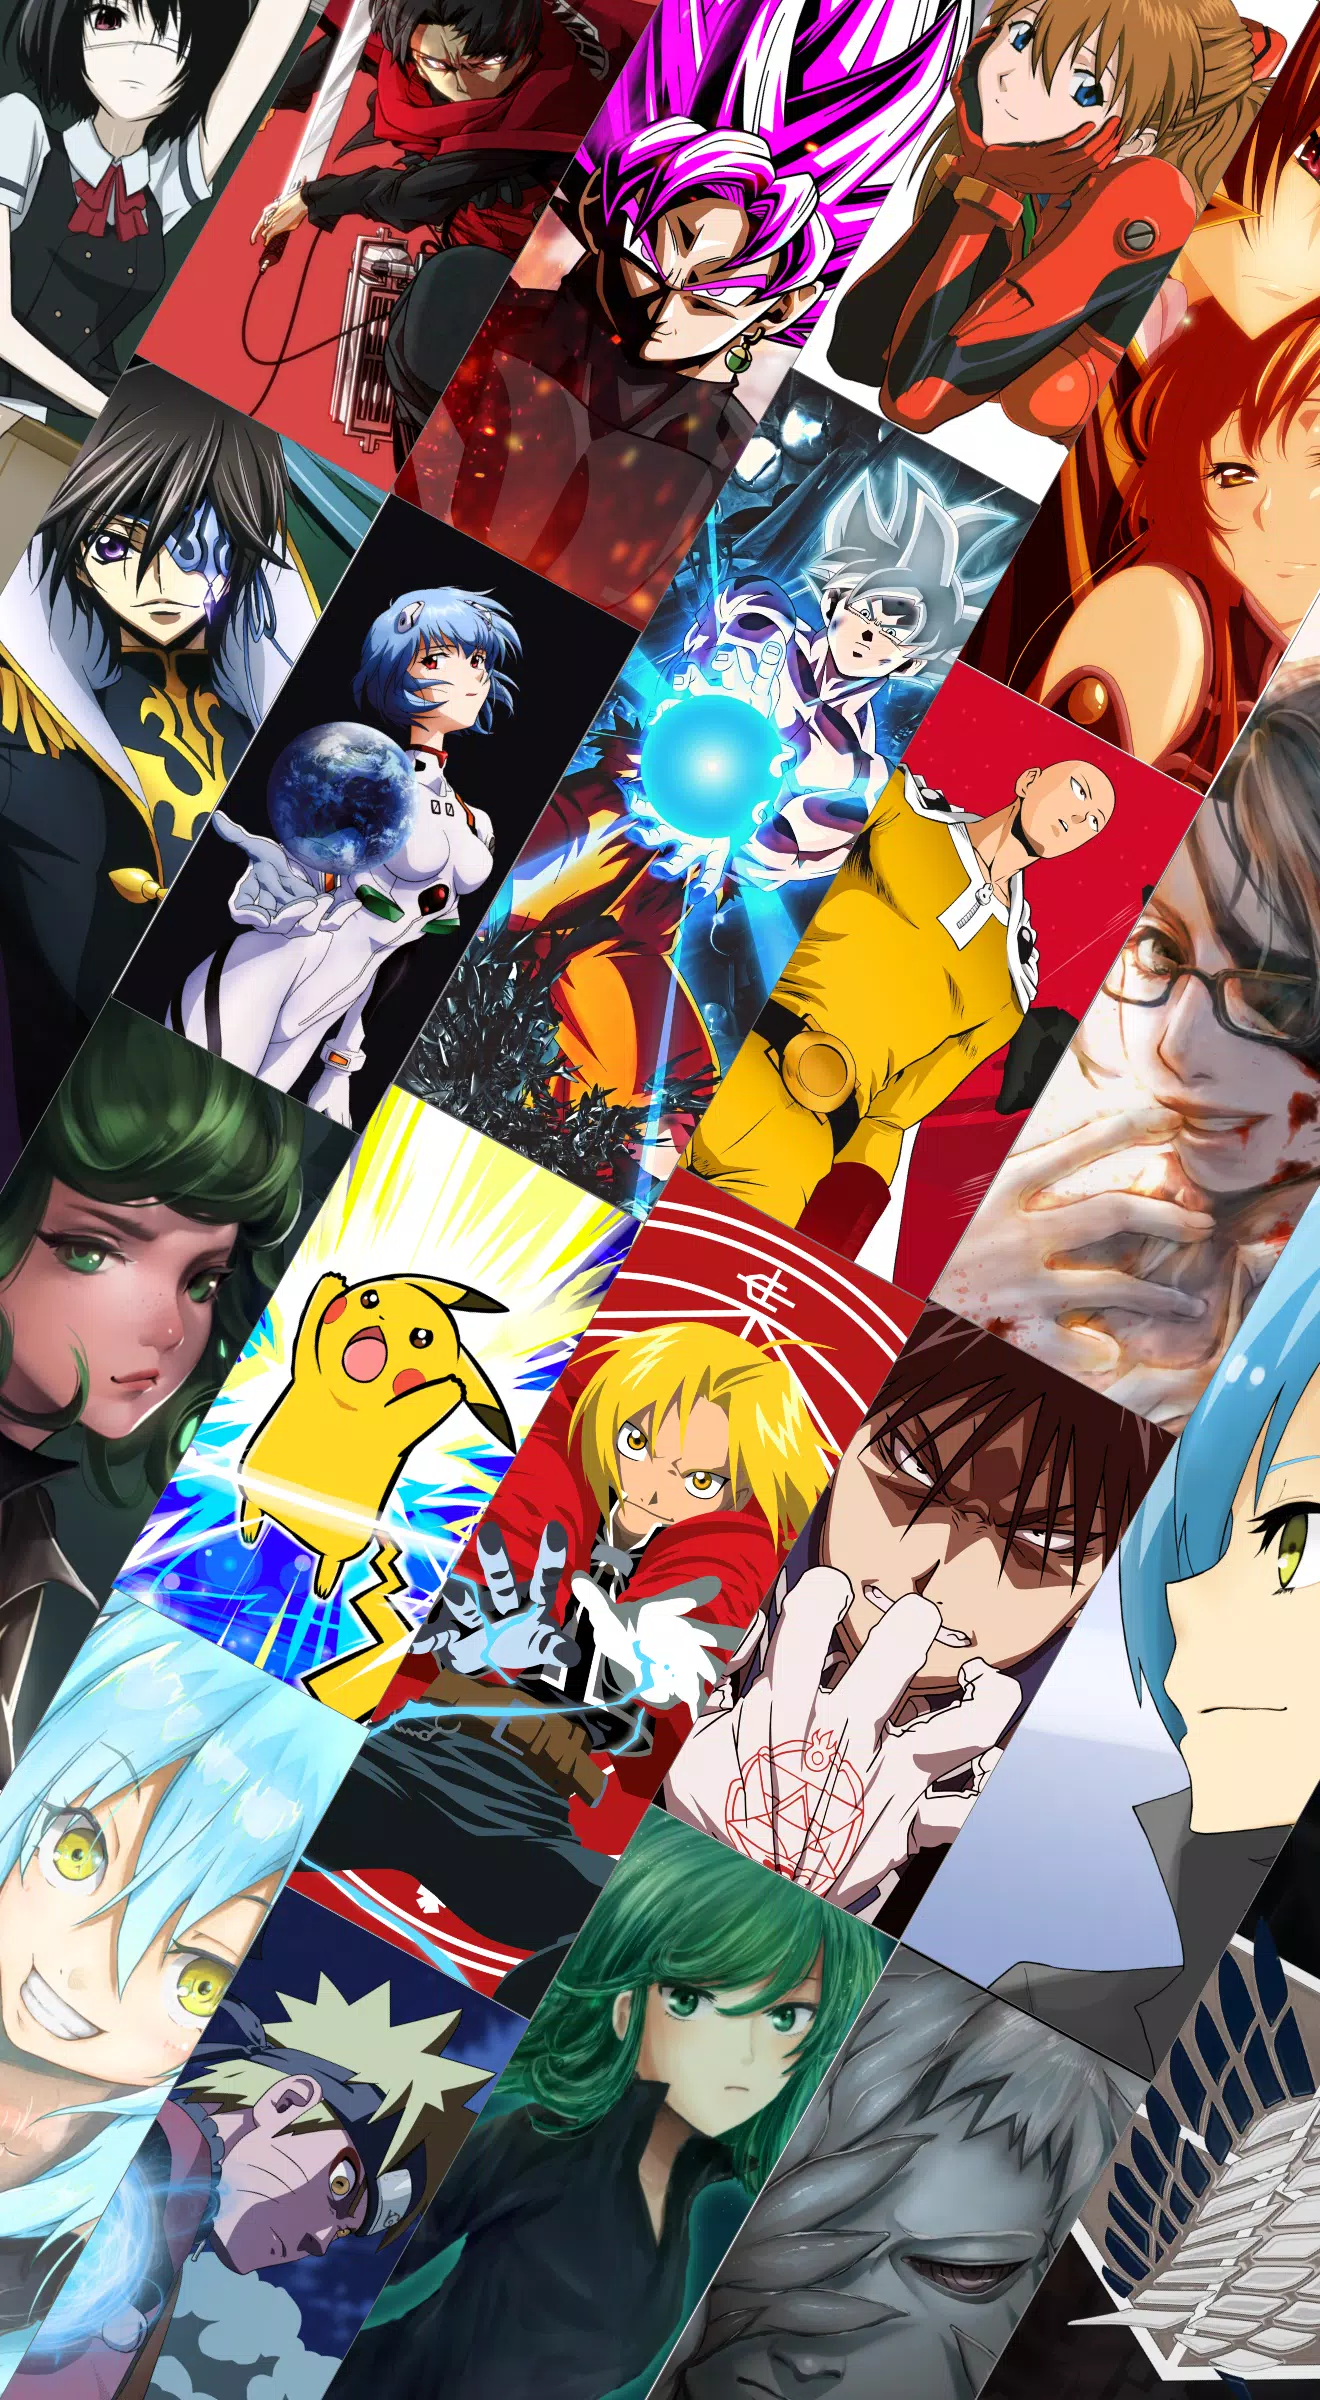 Anime and Manga Wallpapers HD / 4K - 2020 APK for Android Download